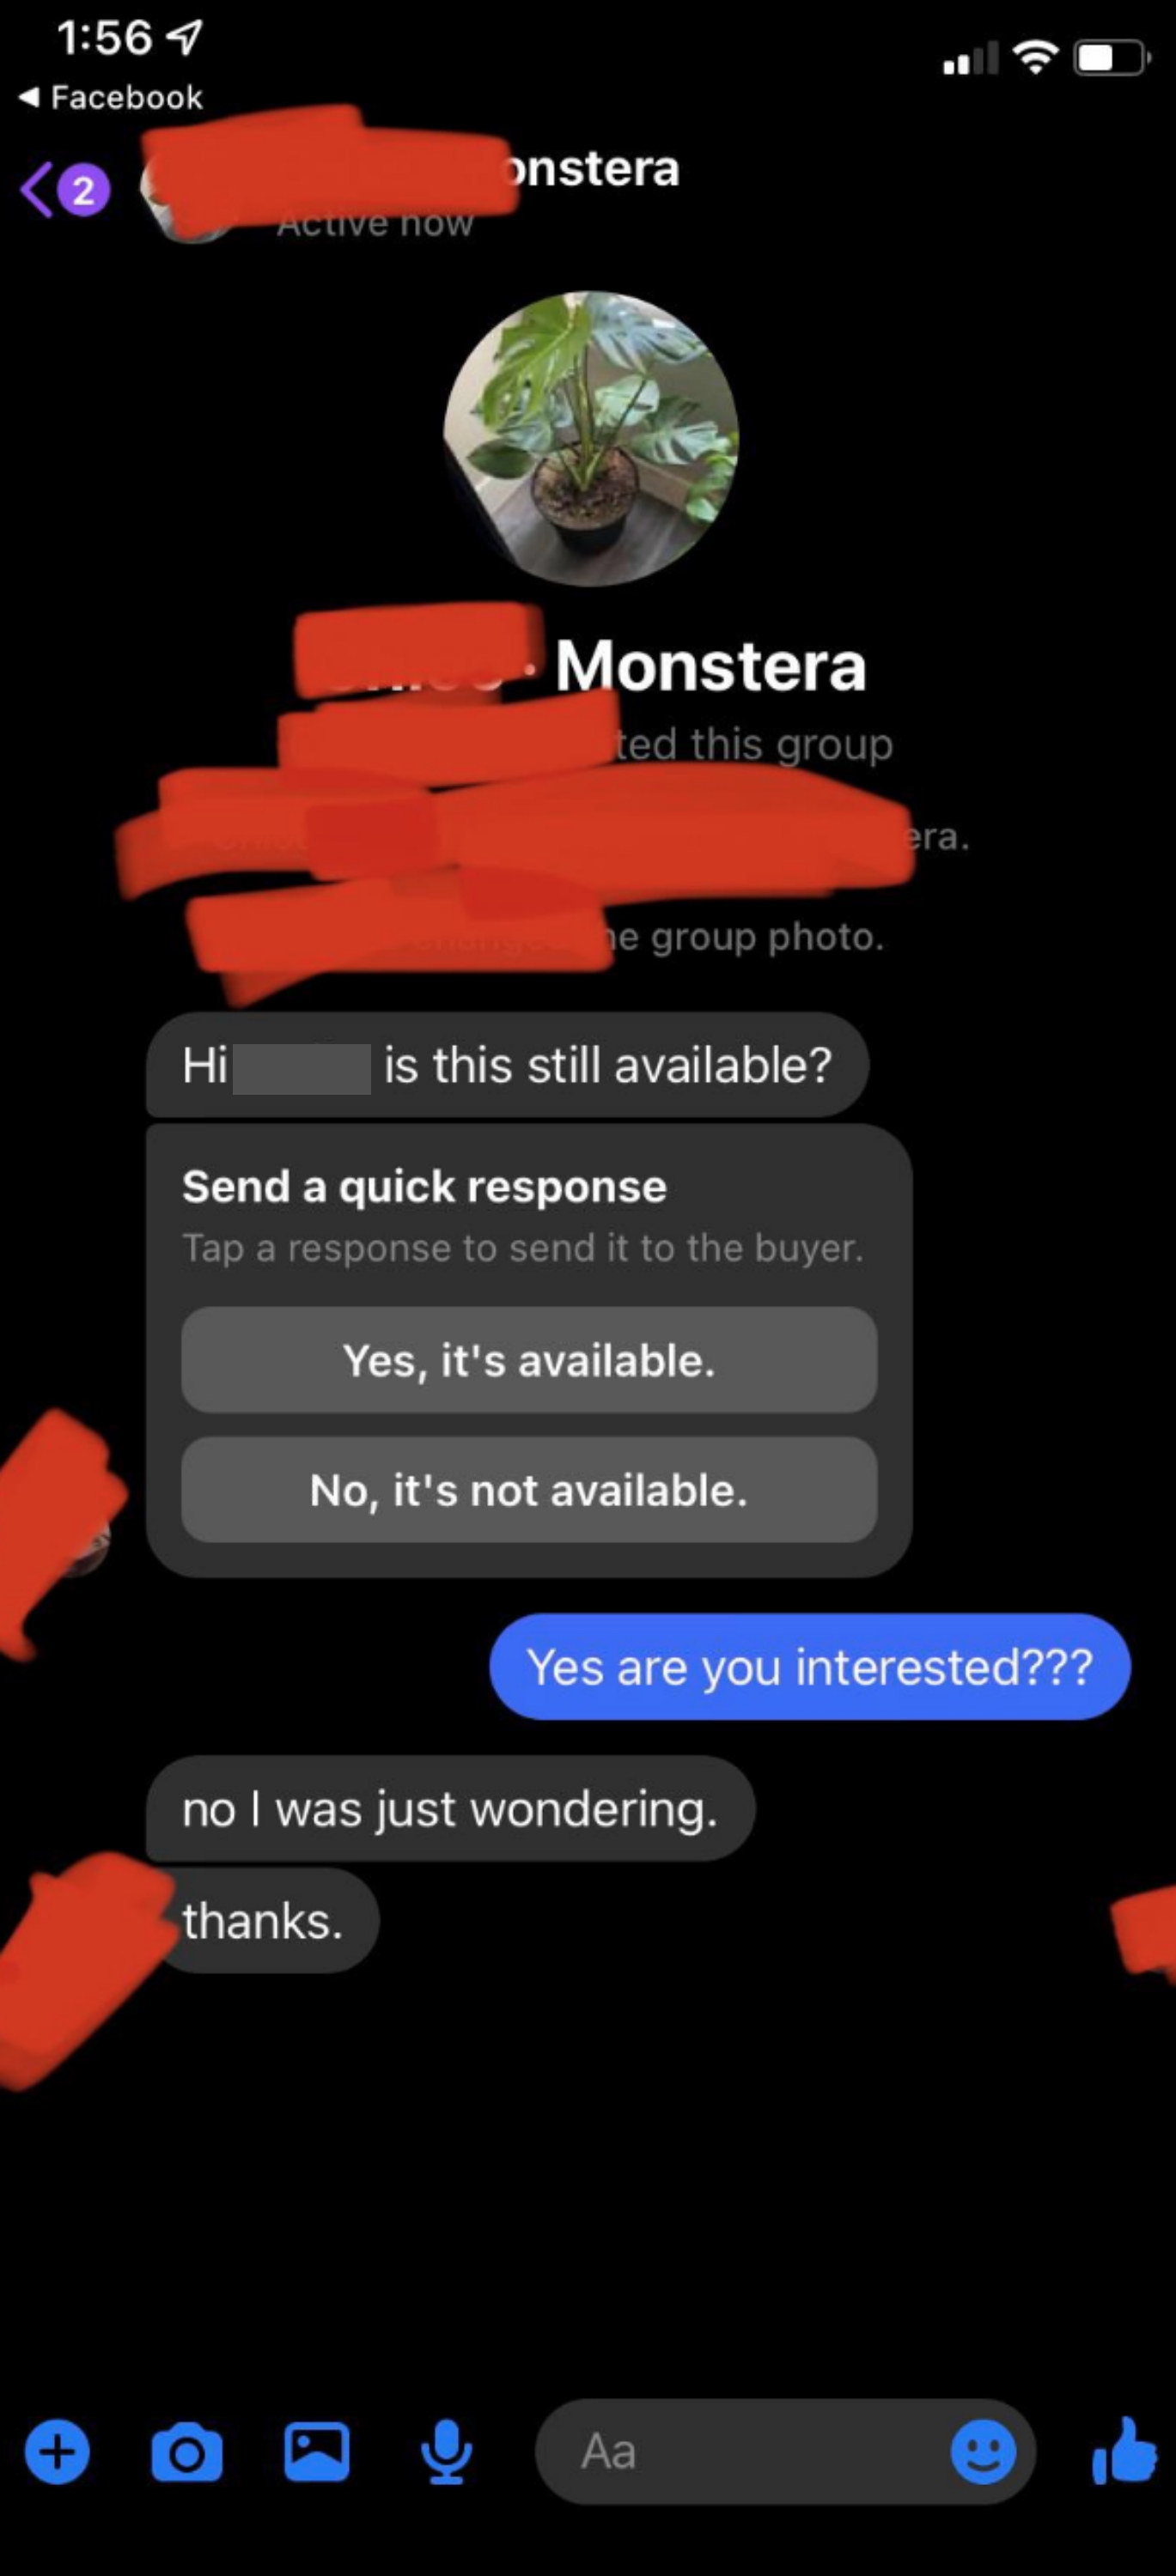 Person asks if item is still available, and when seller says yes, are they interested, person says &quot;No, I was just wondering&quot;